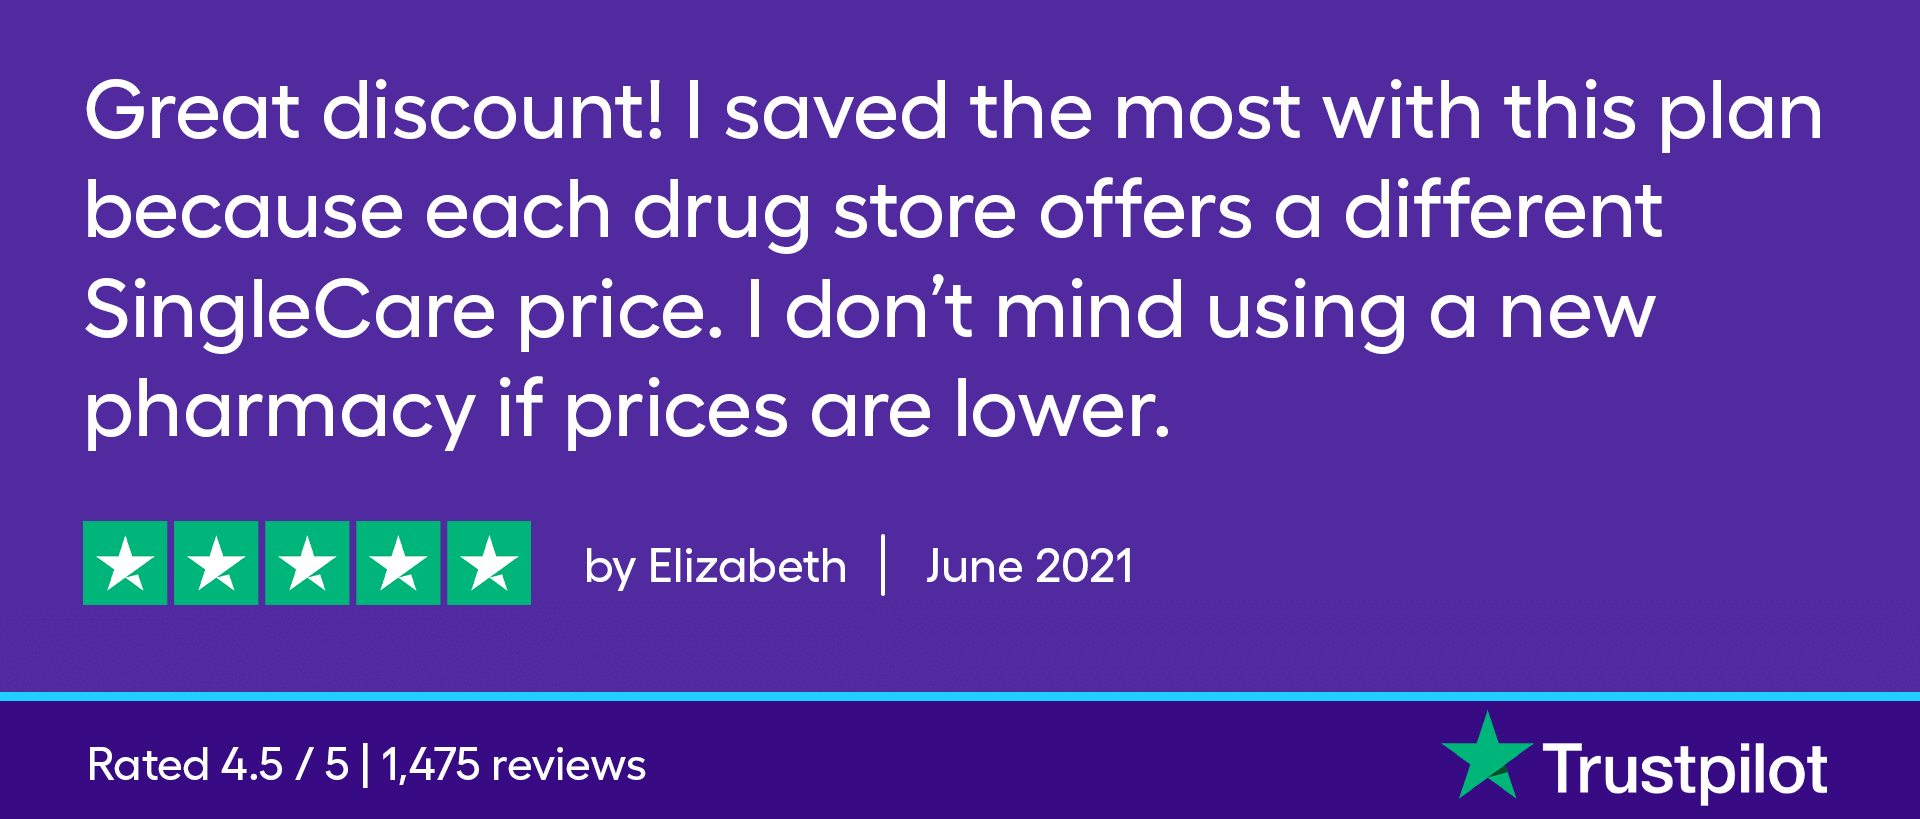 Great discount! I saved the most with this plan because each drug store offers a different SingleCare price. I don’t mind using a new pharmacy if prices are lower. 